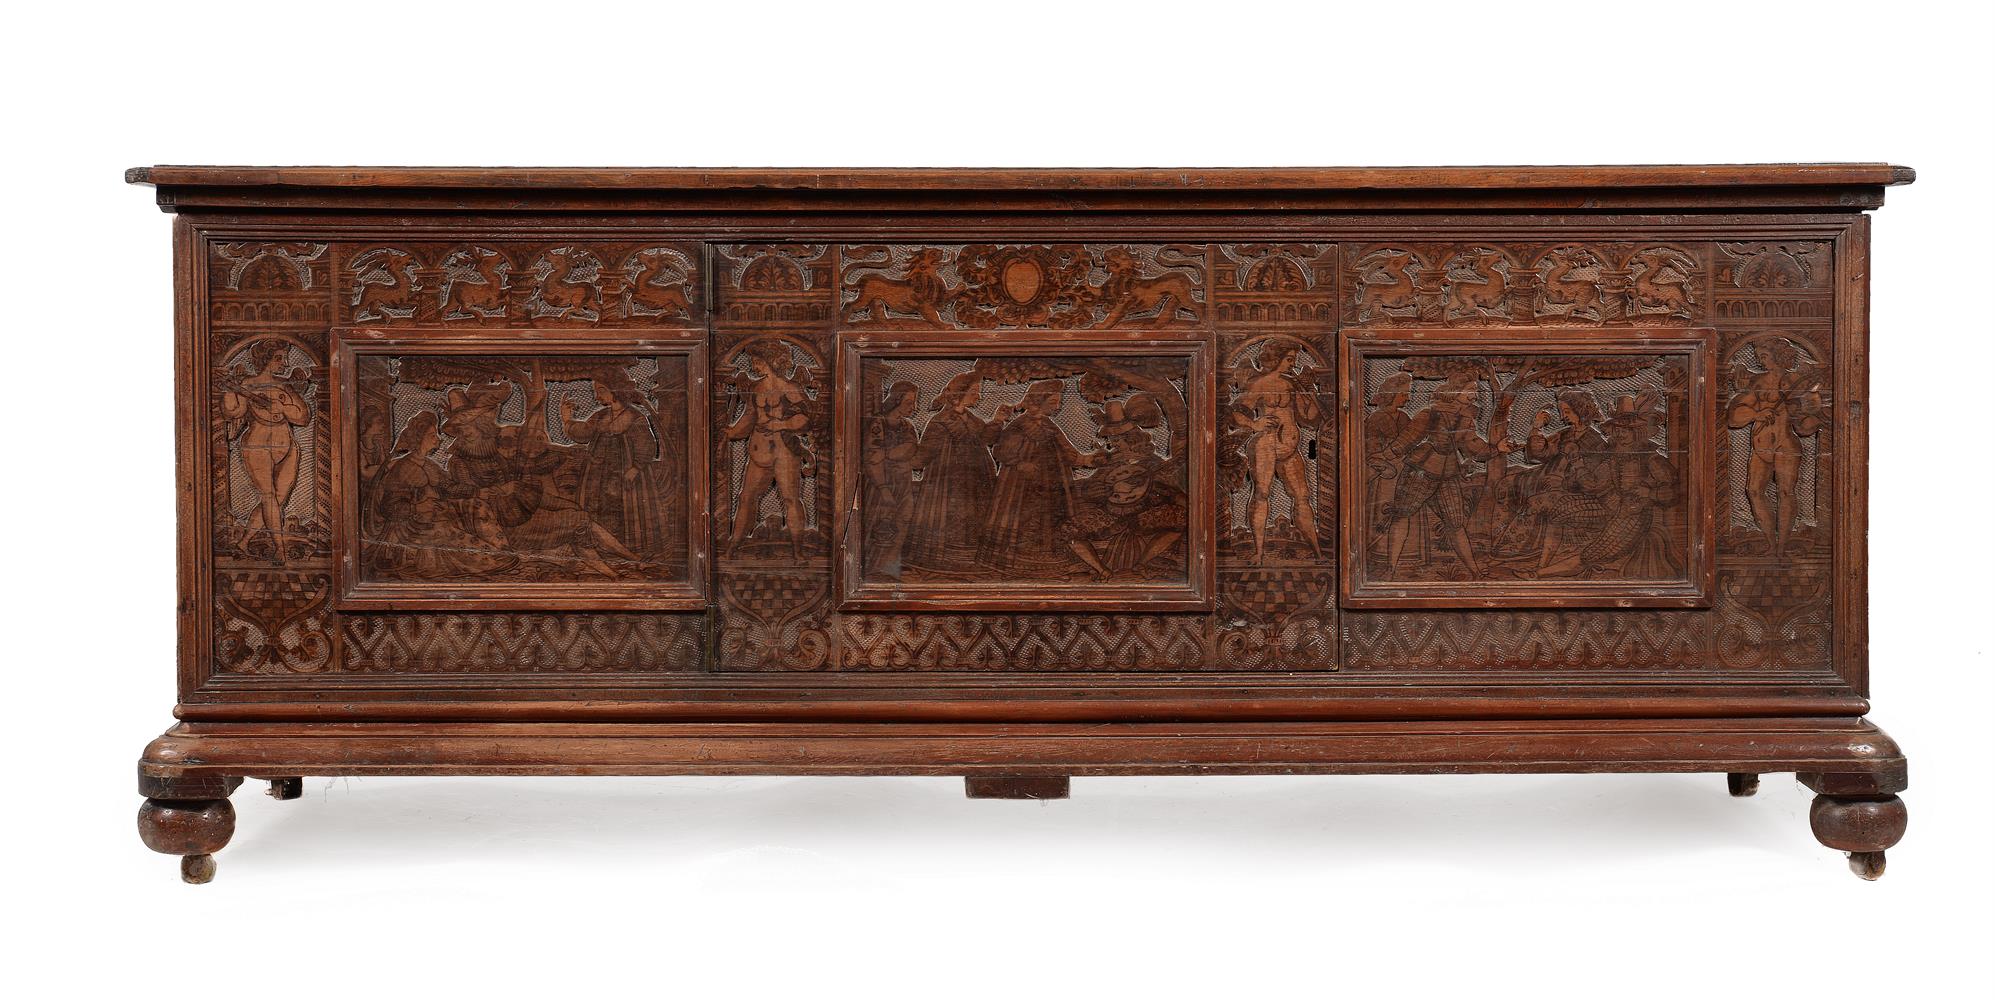 AN ITALIAN CARVED AND POKERWORK DECORATED CHEST OR CASSONE, 16TH CENTURY AND LATER